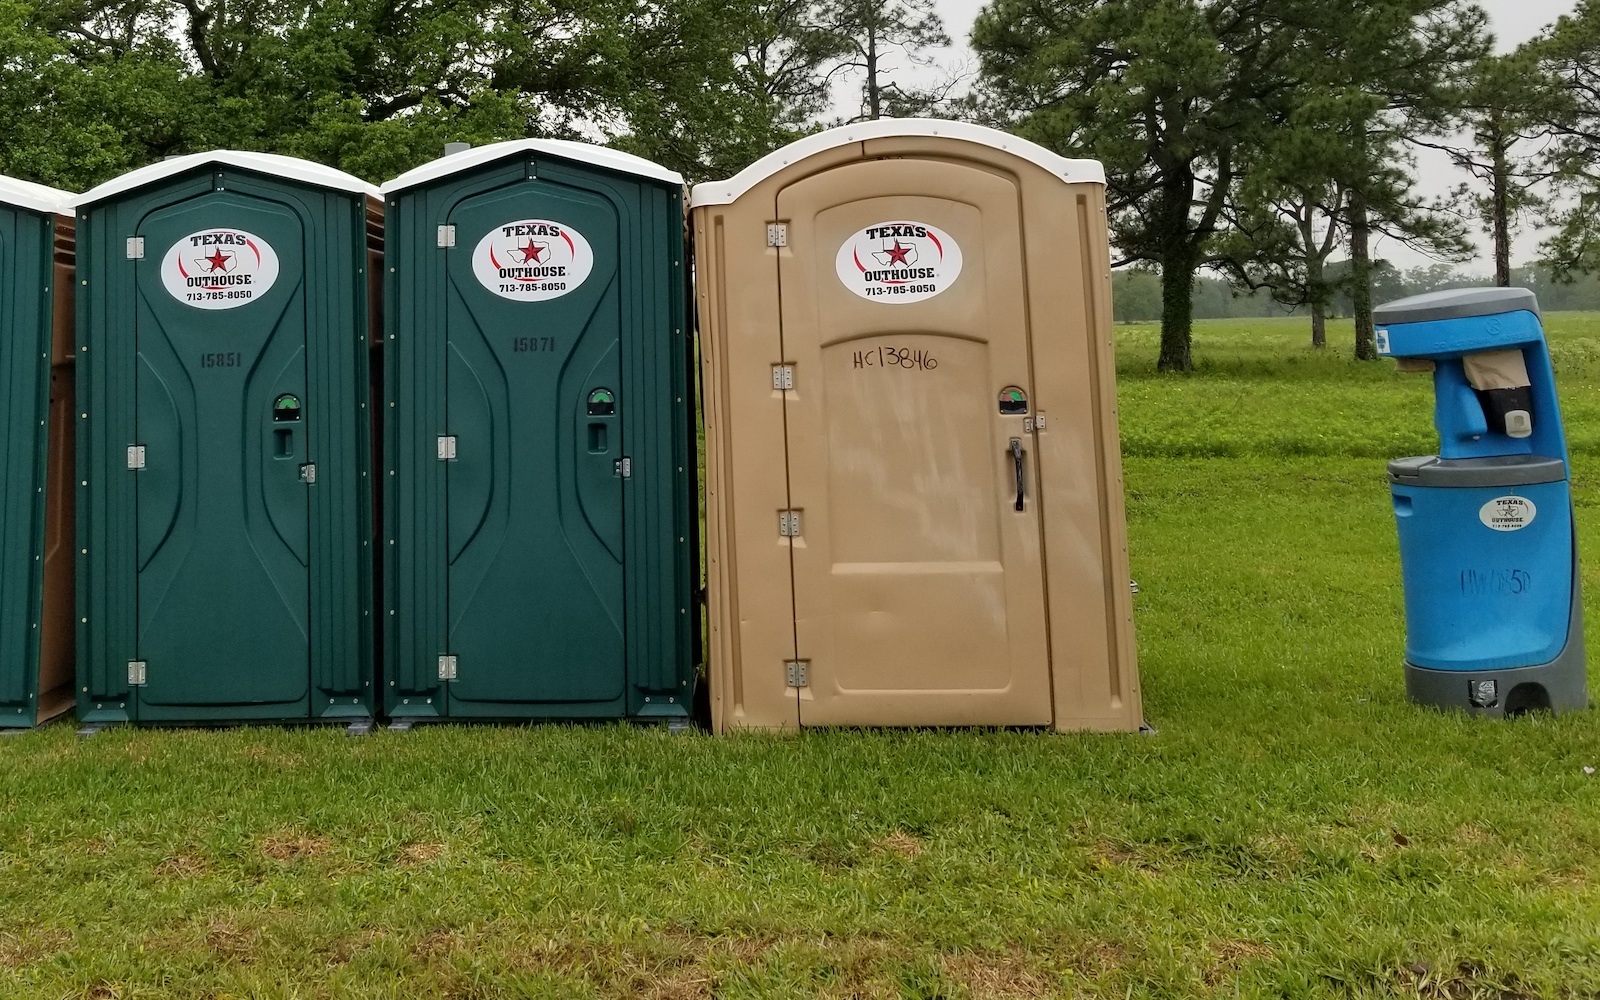 Texas Outhouse portable toilets at an event planned by a coordinator who considered porta potty rental prices